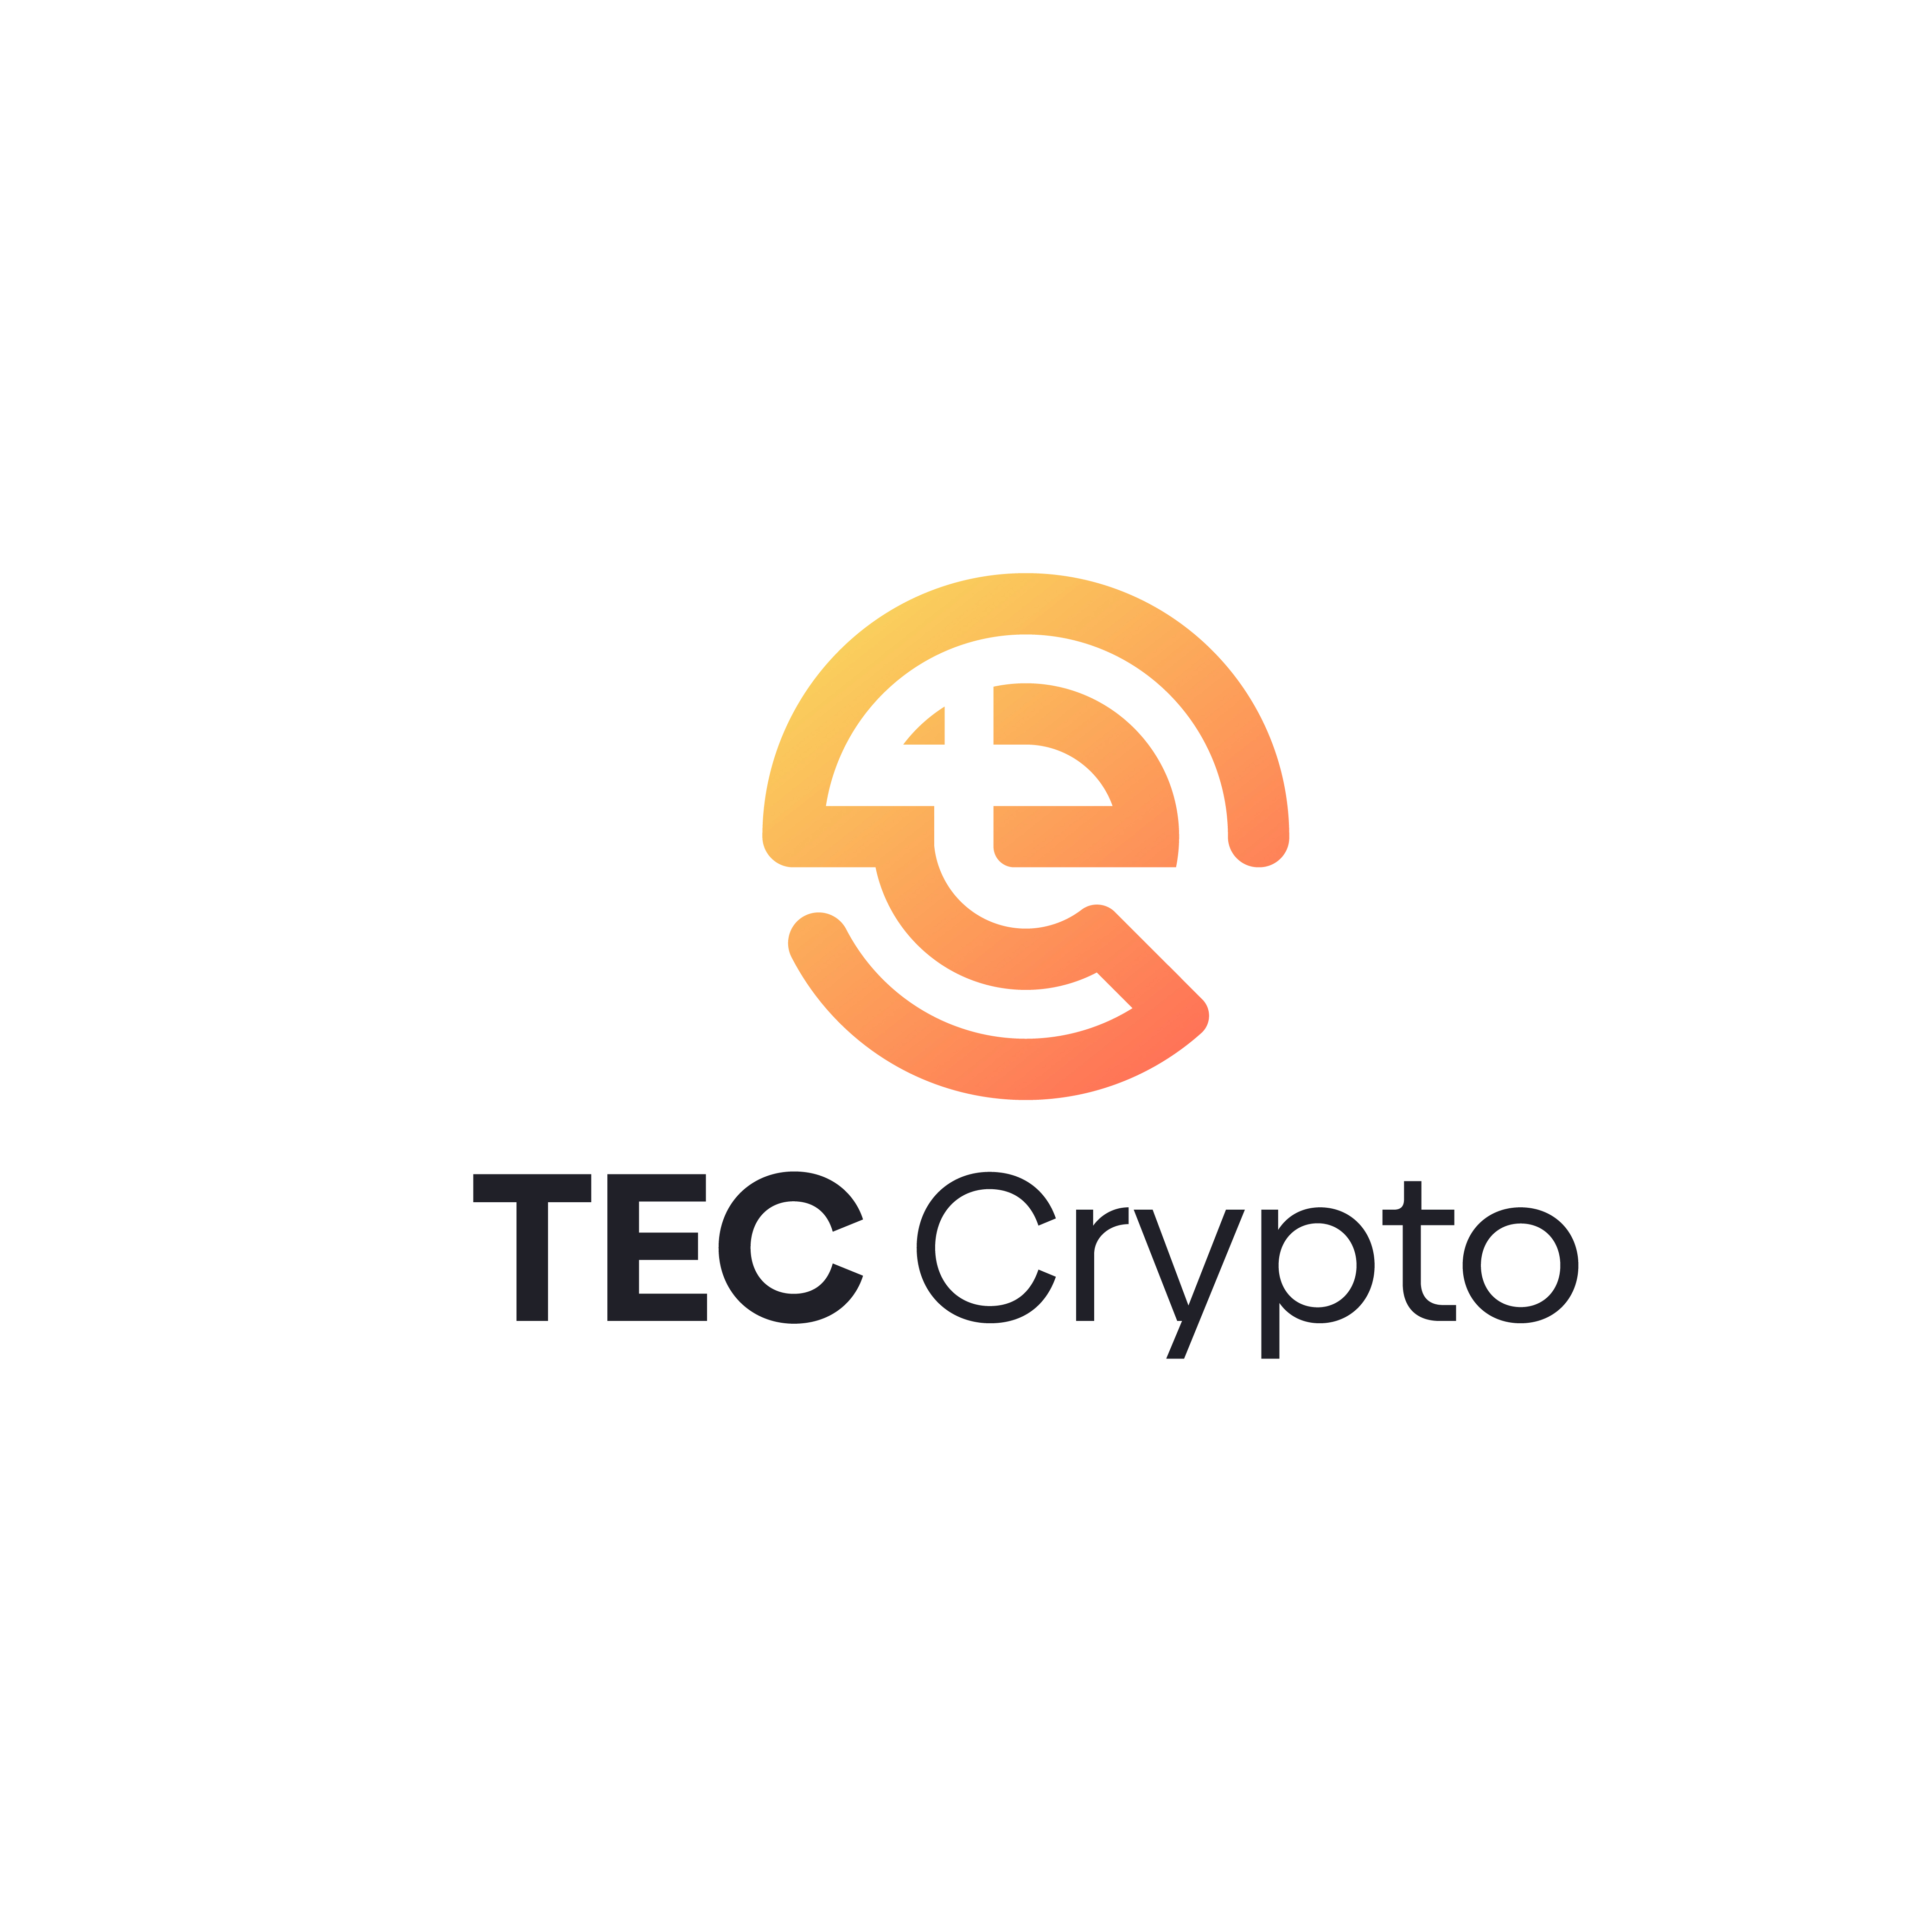 TecCrypto Sets Industry Standards with Carbon-Neutral Mining Operations